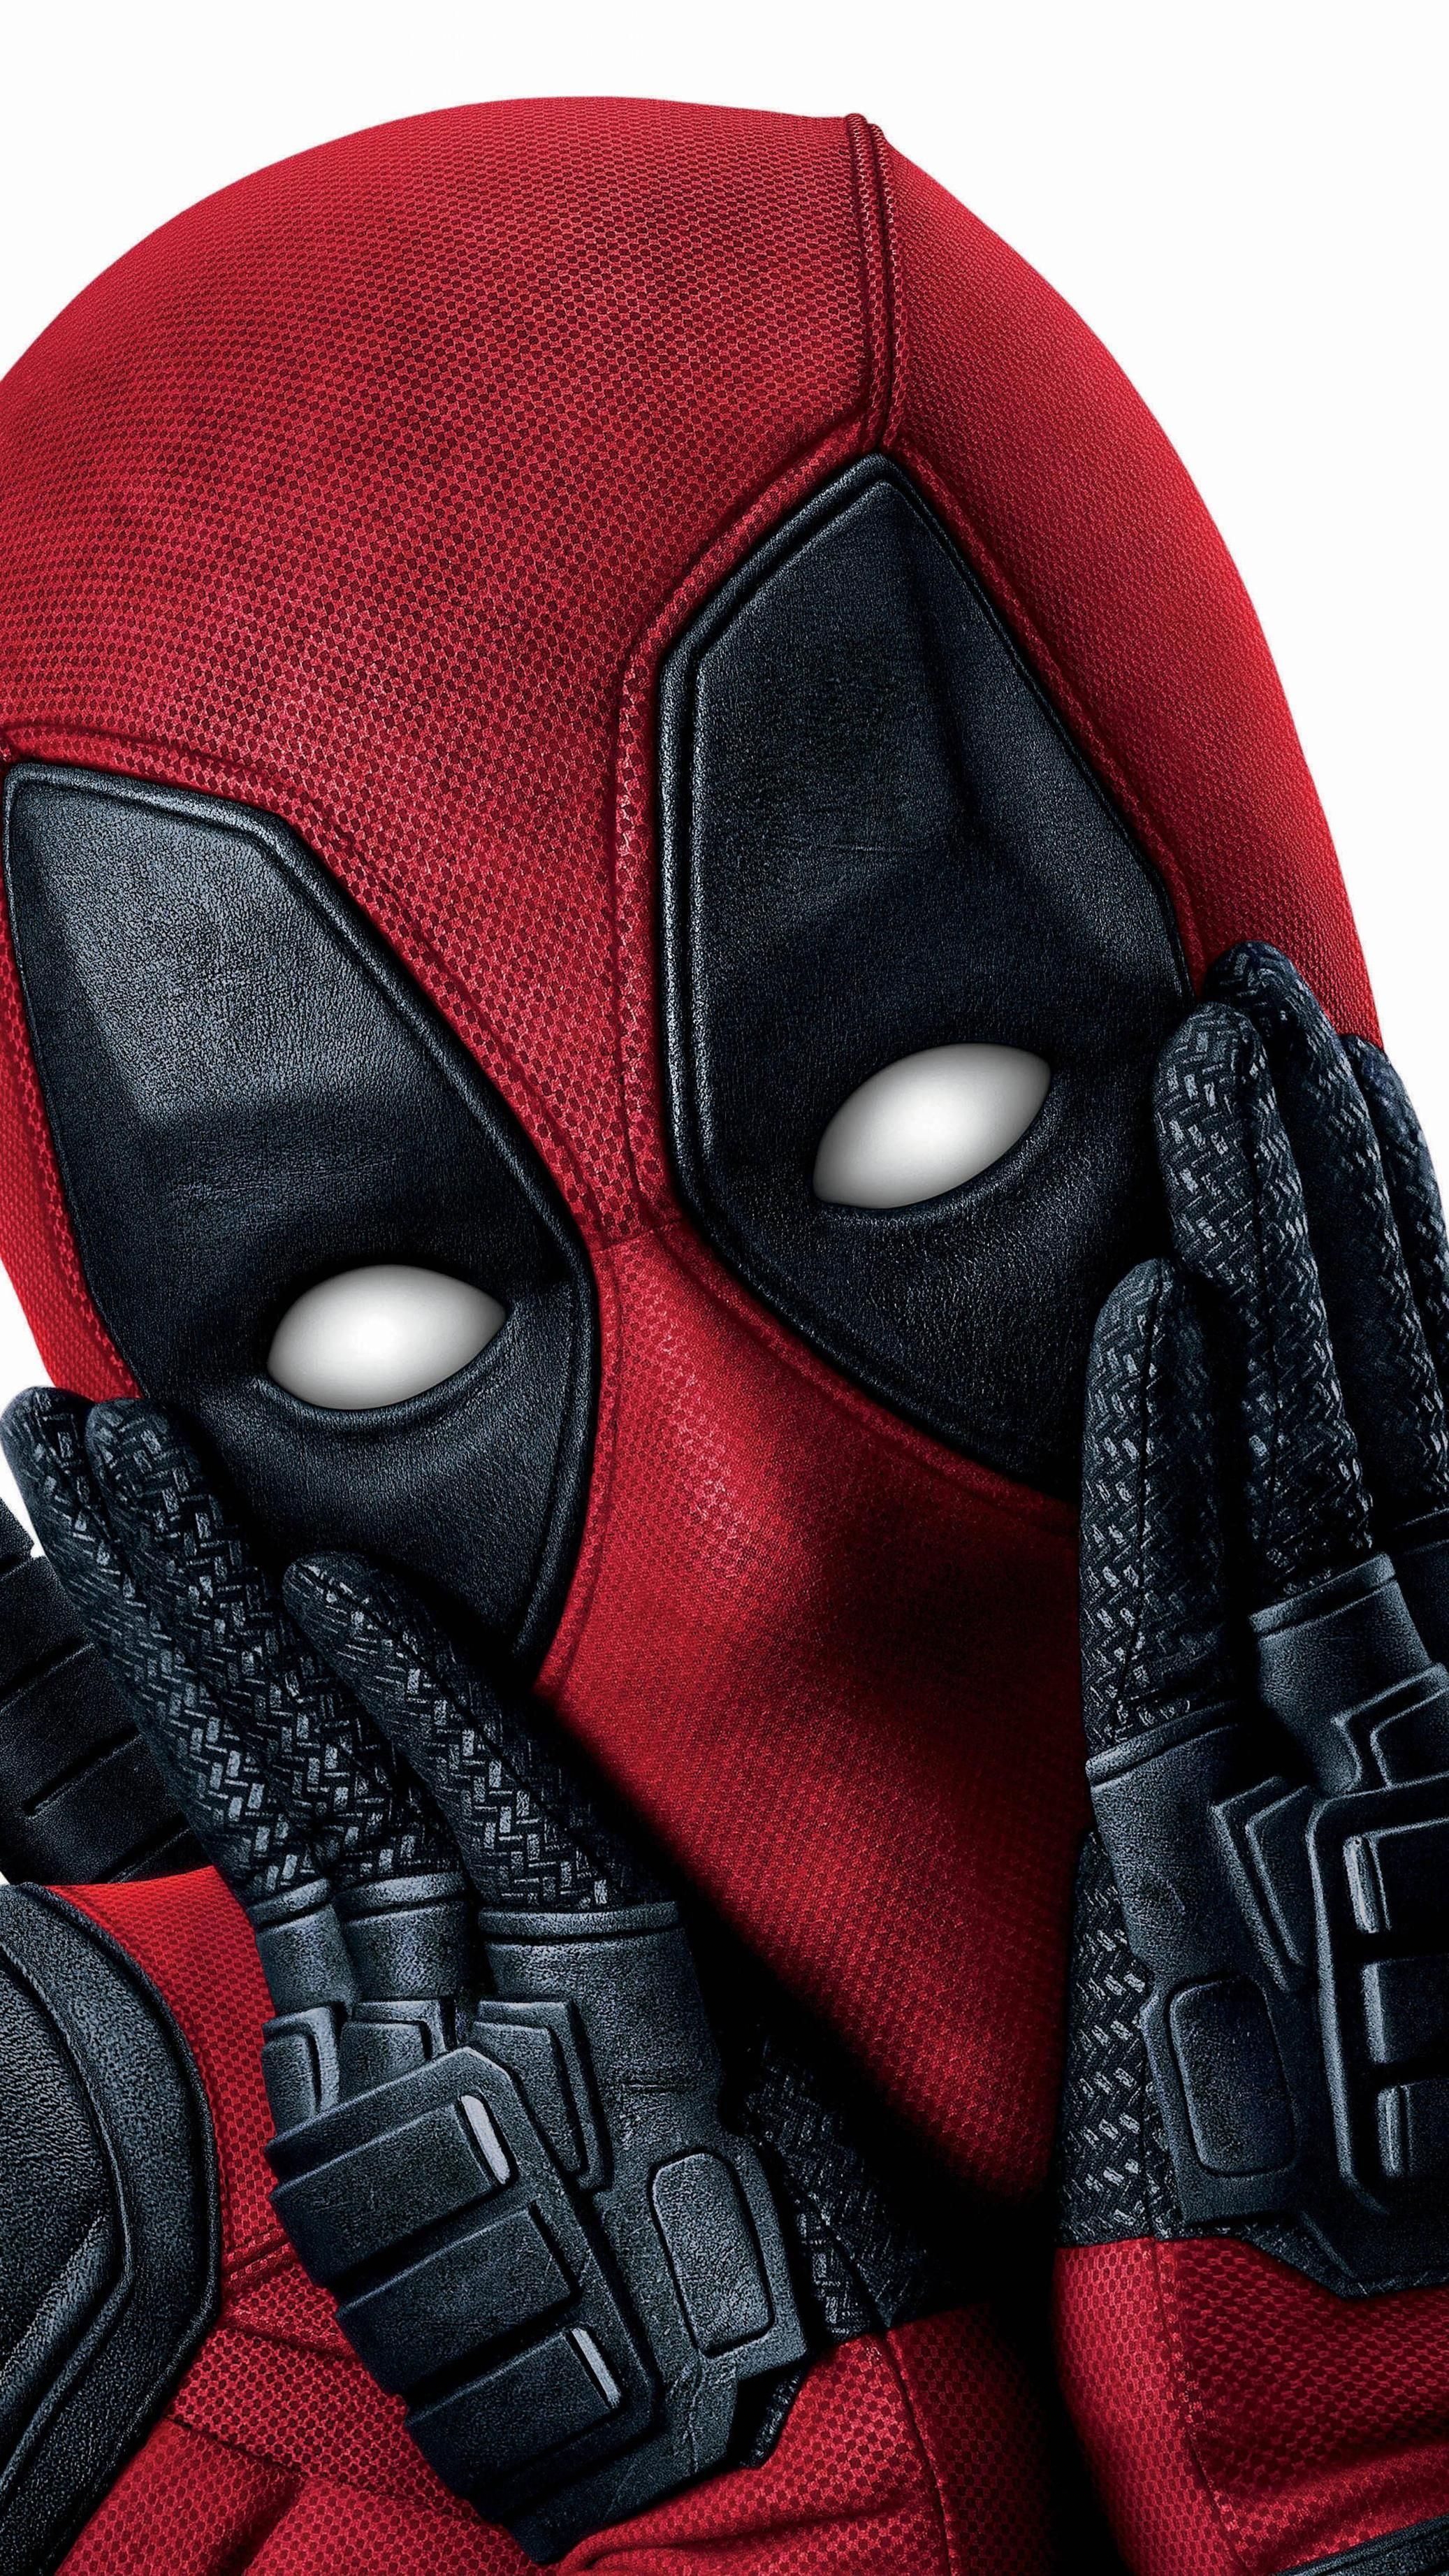 1080p and some 4k wallpaper for phones. Deadpool